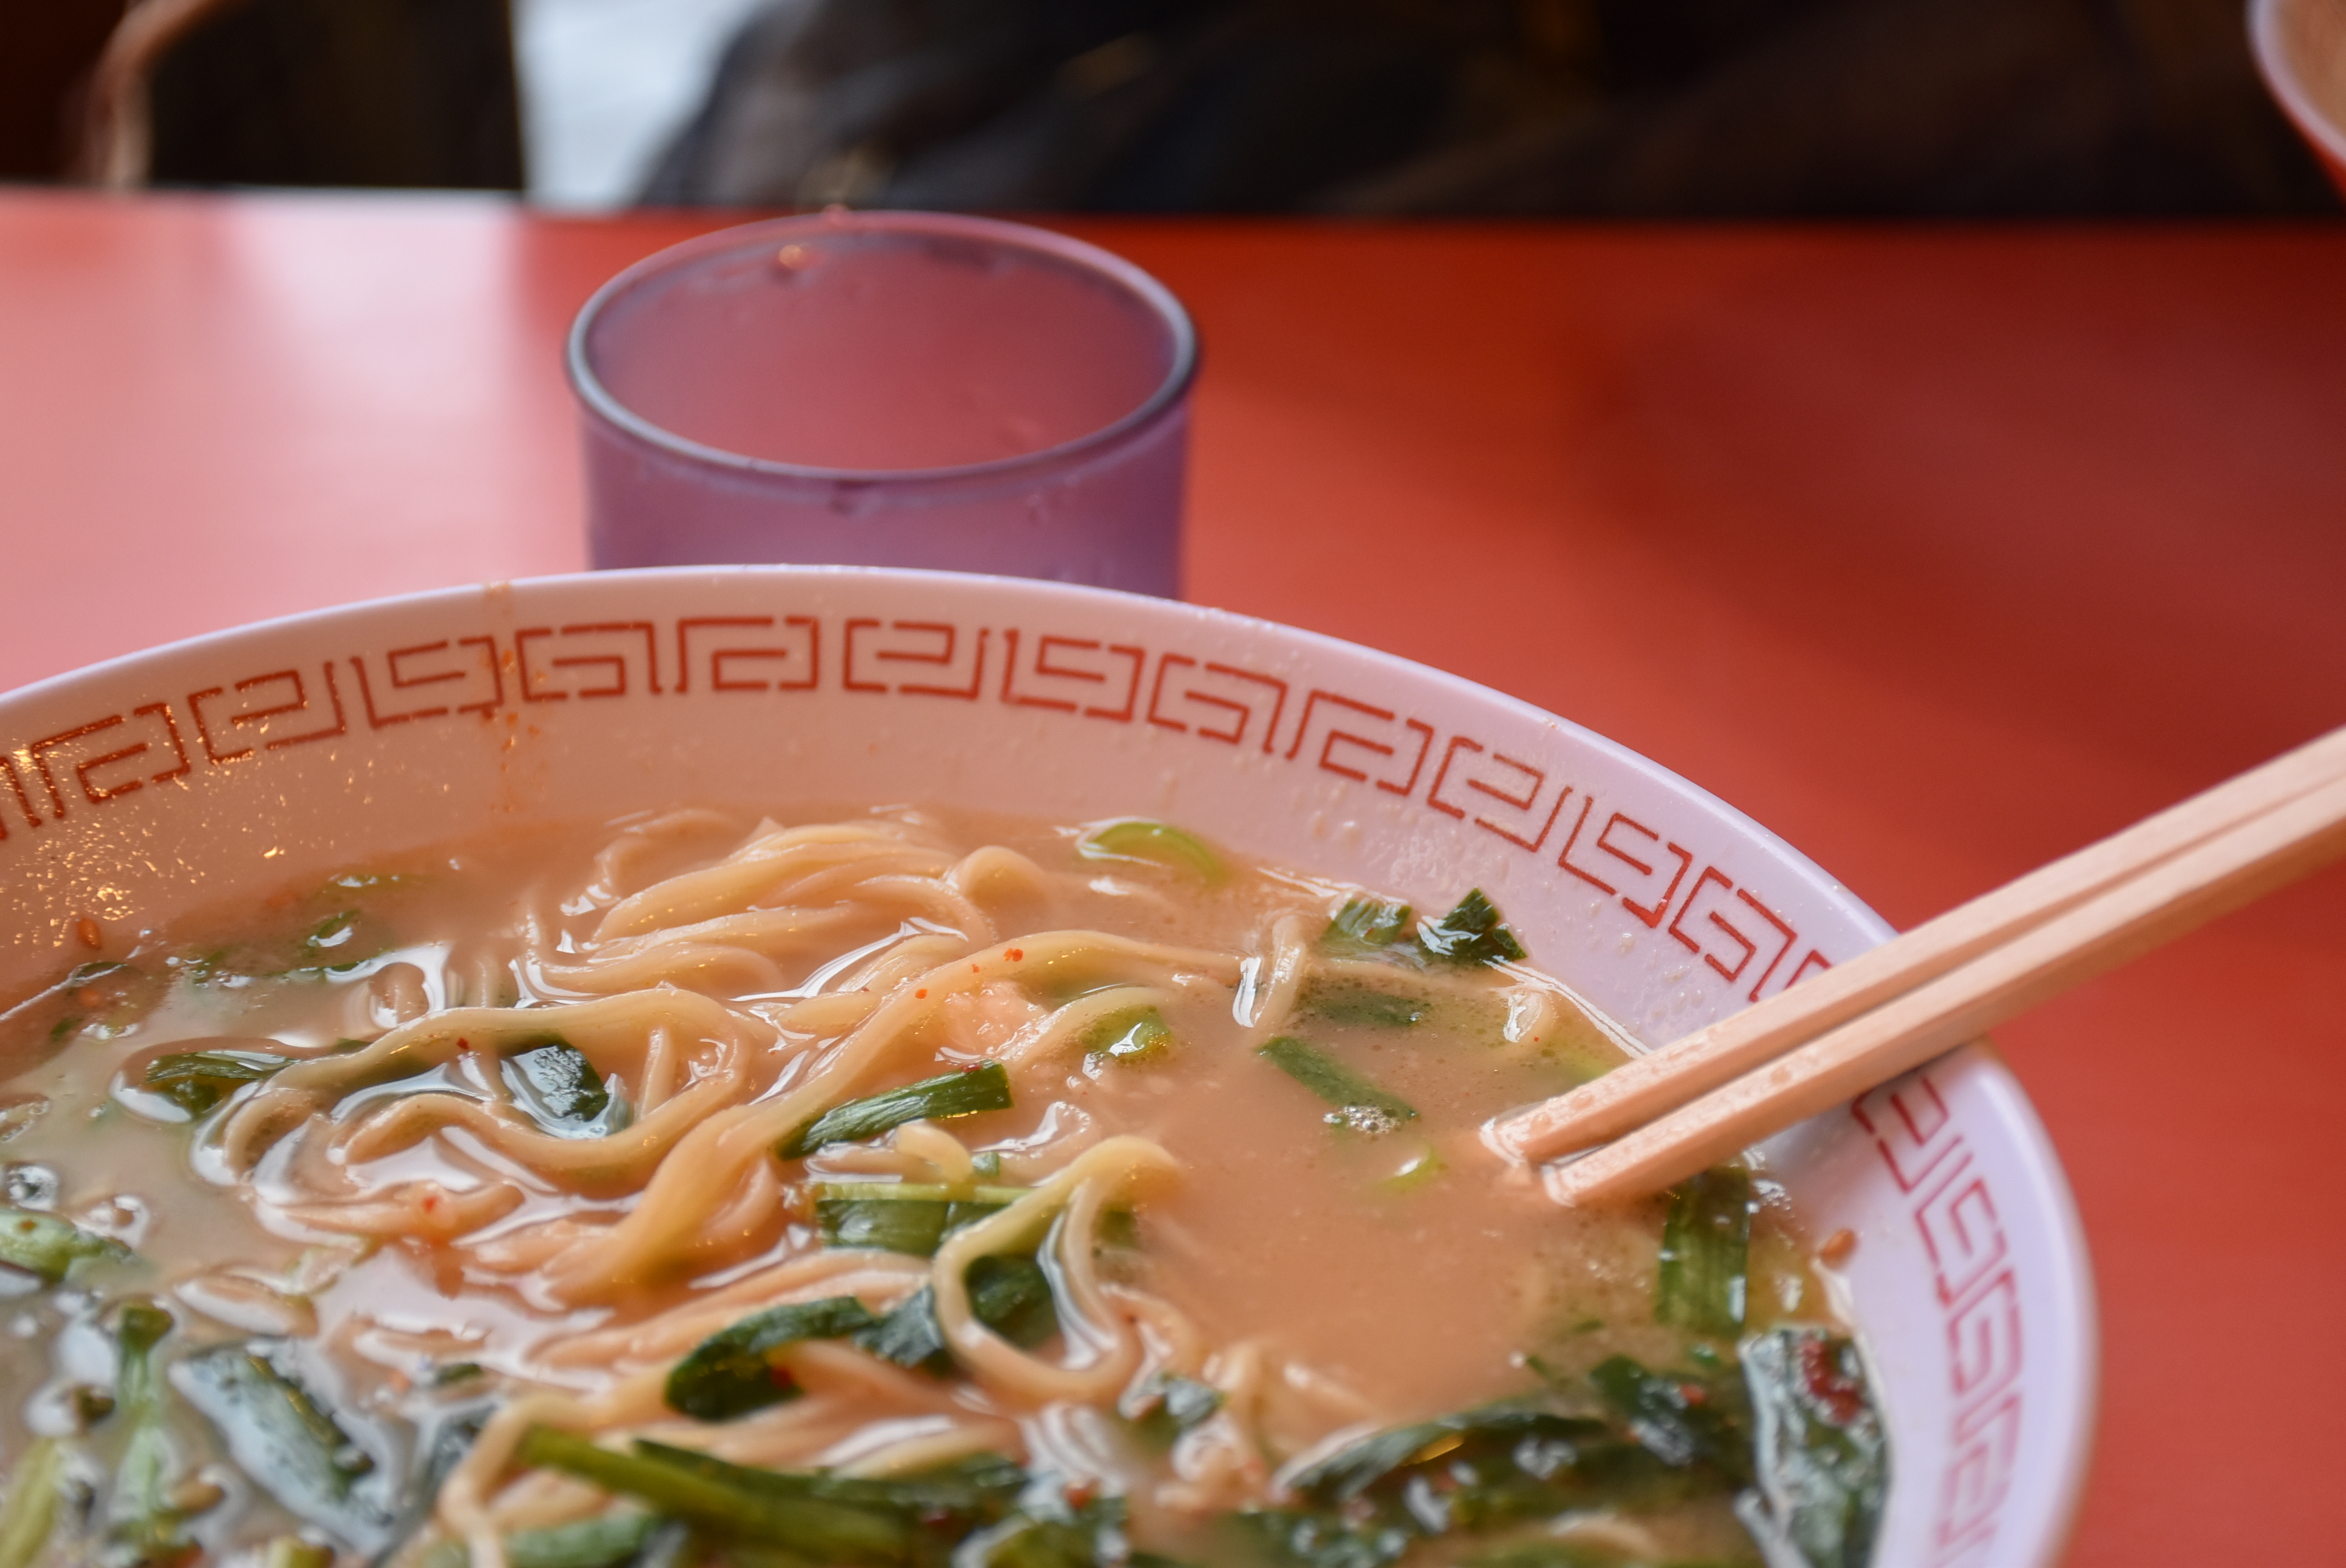 Eating My First Bowl of Ramen in Japan Japanese Food Cultural Travel Experience